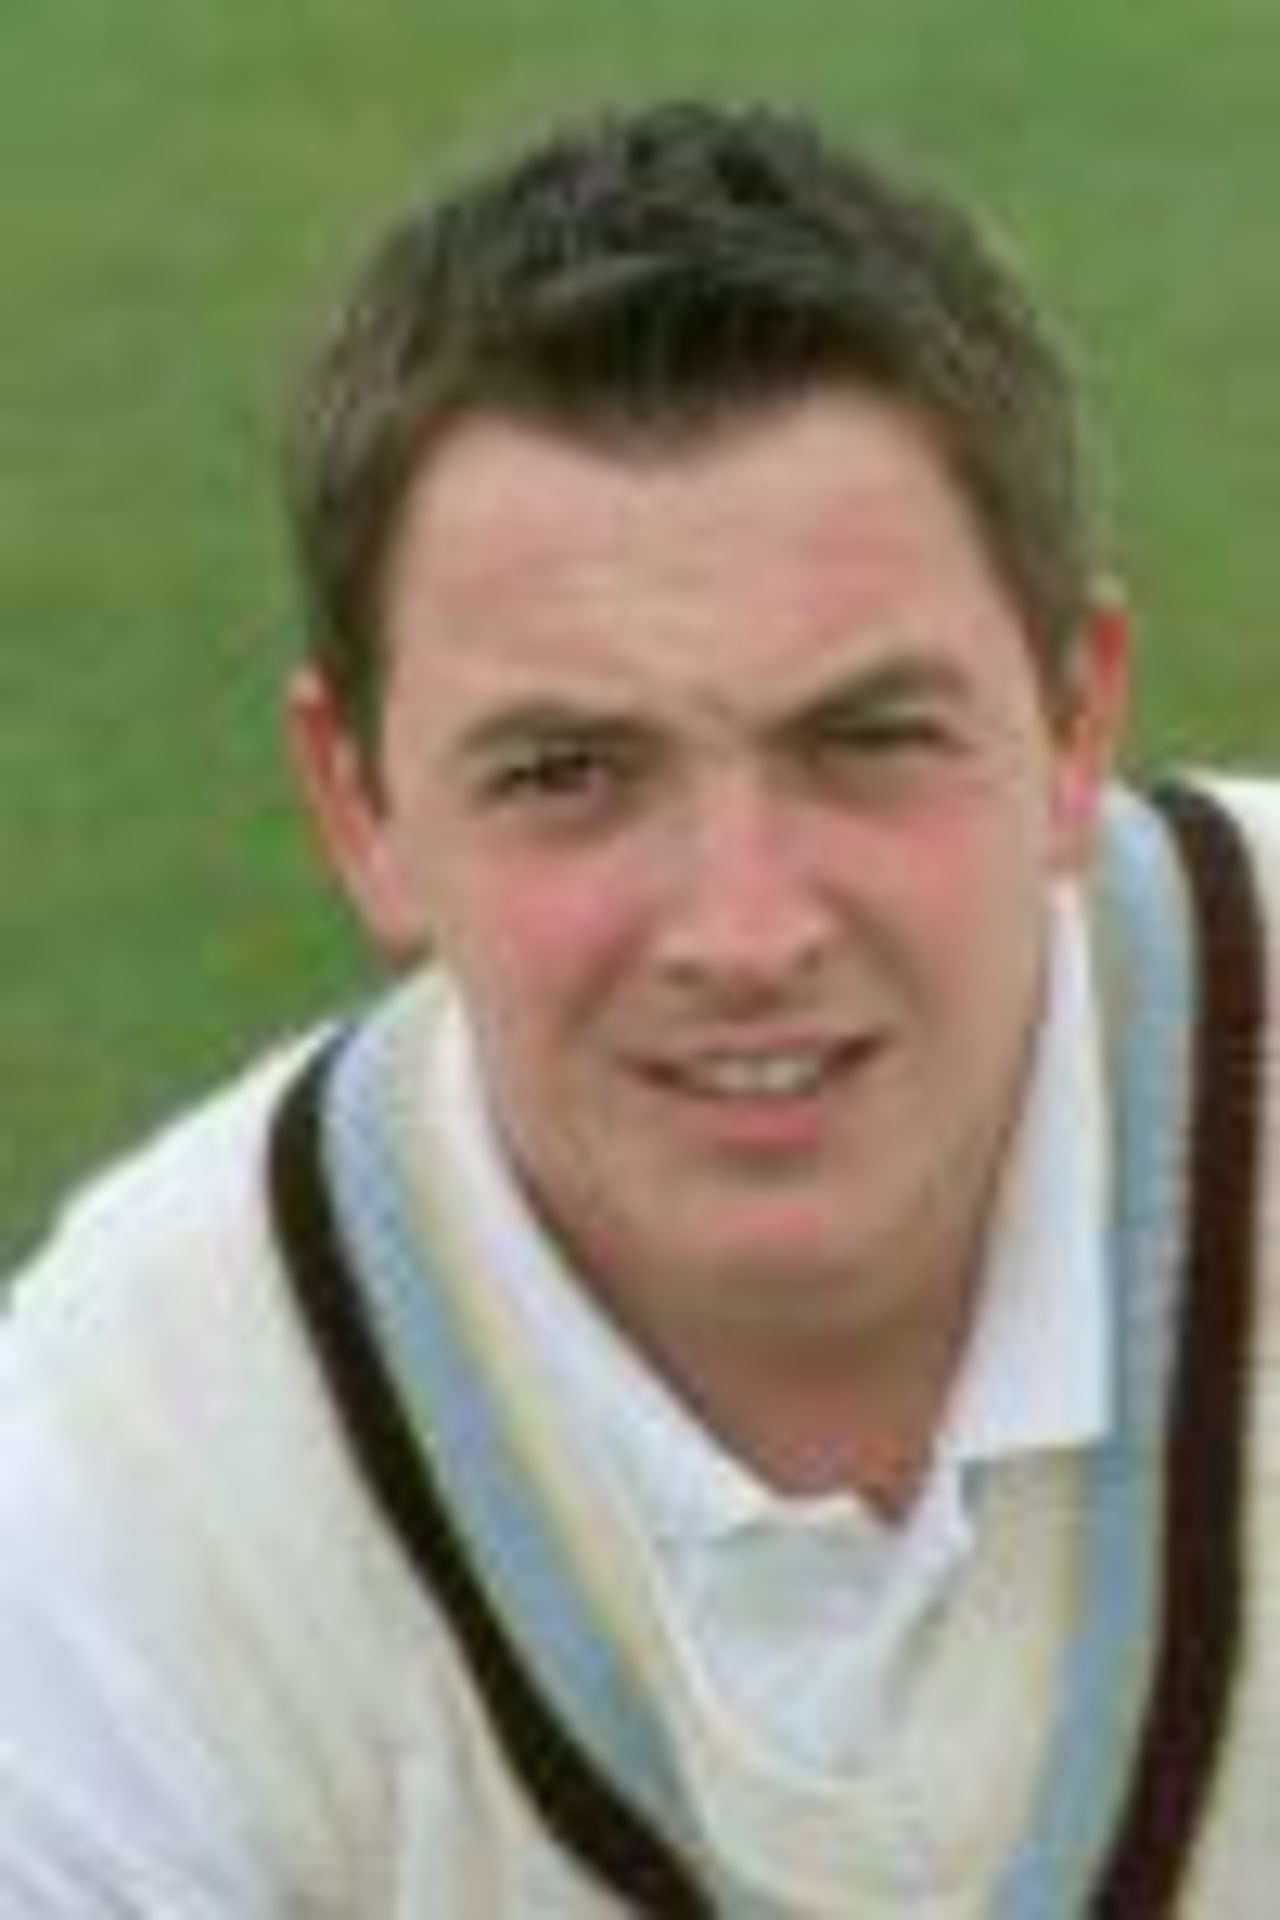 Taken at the Derbys CCC Photocall, April 2001